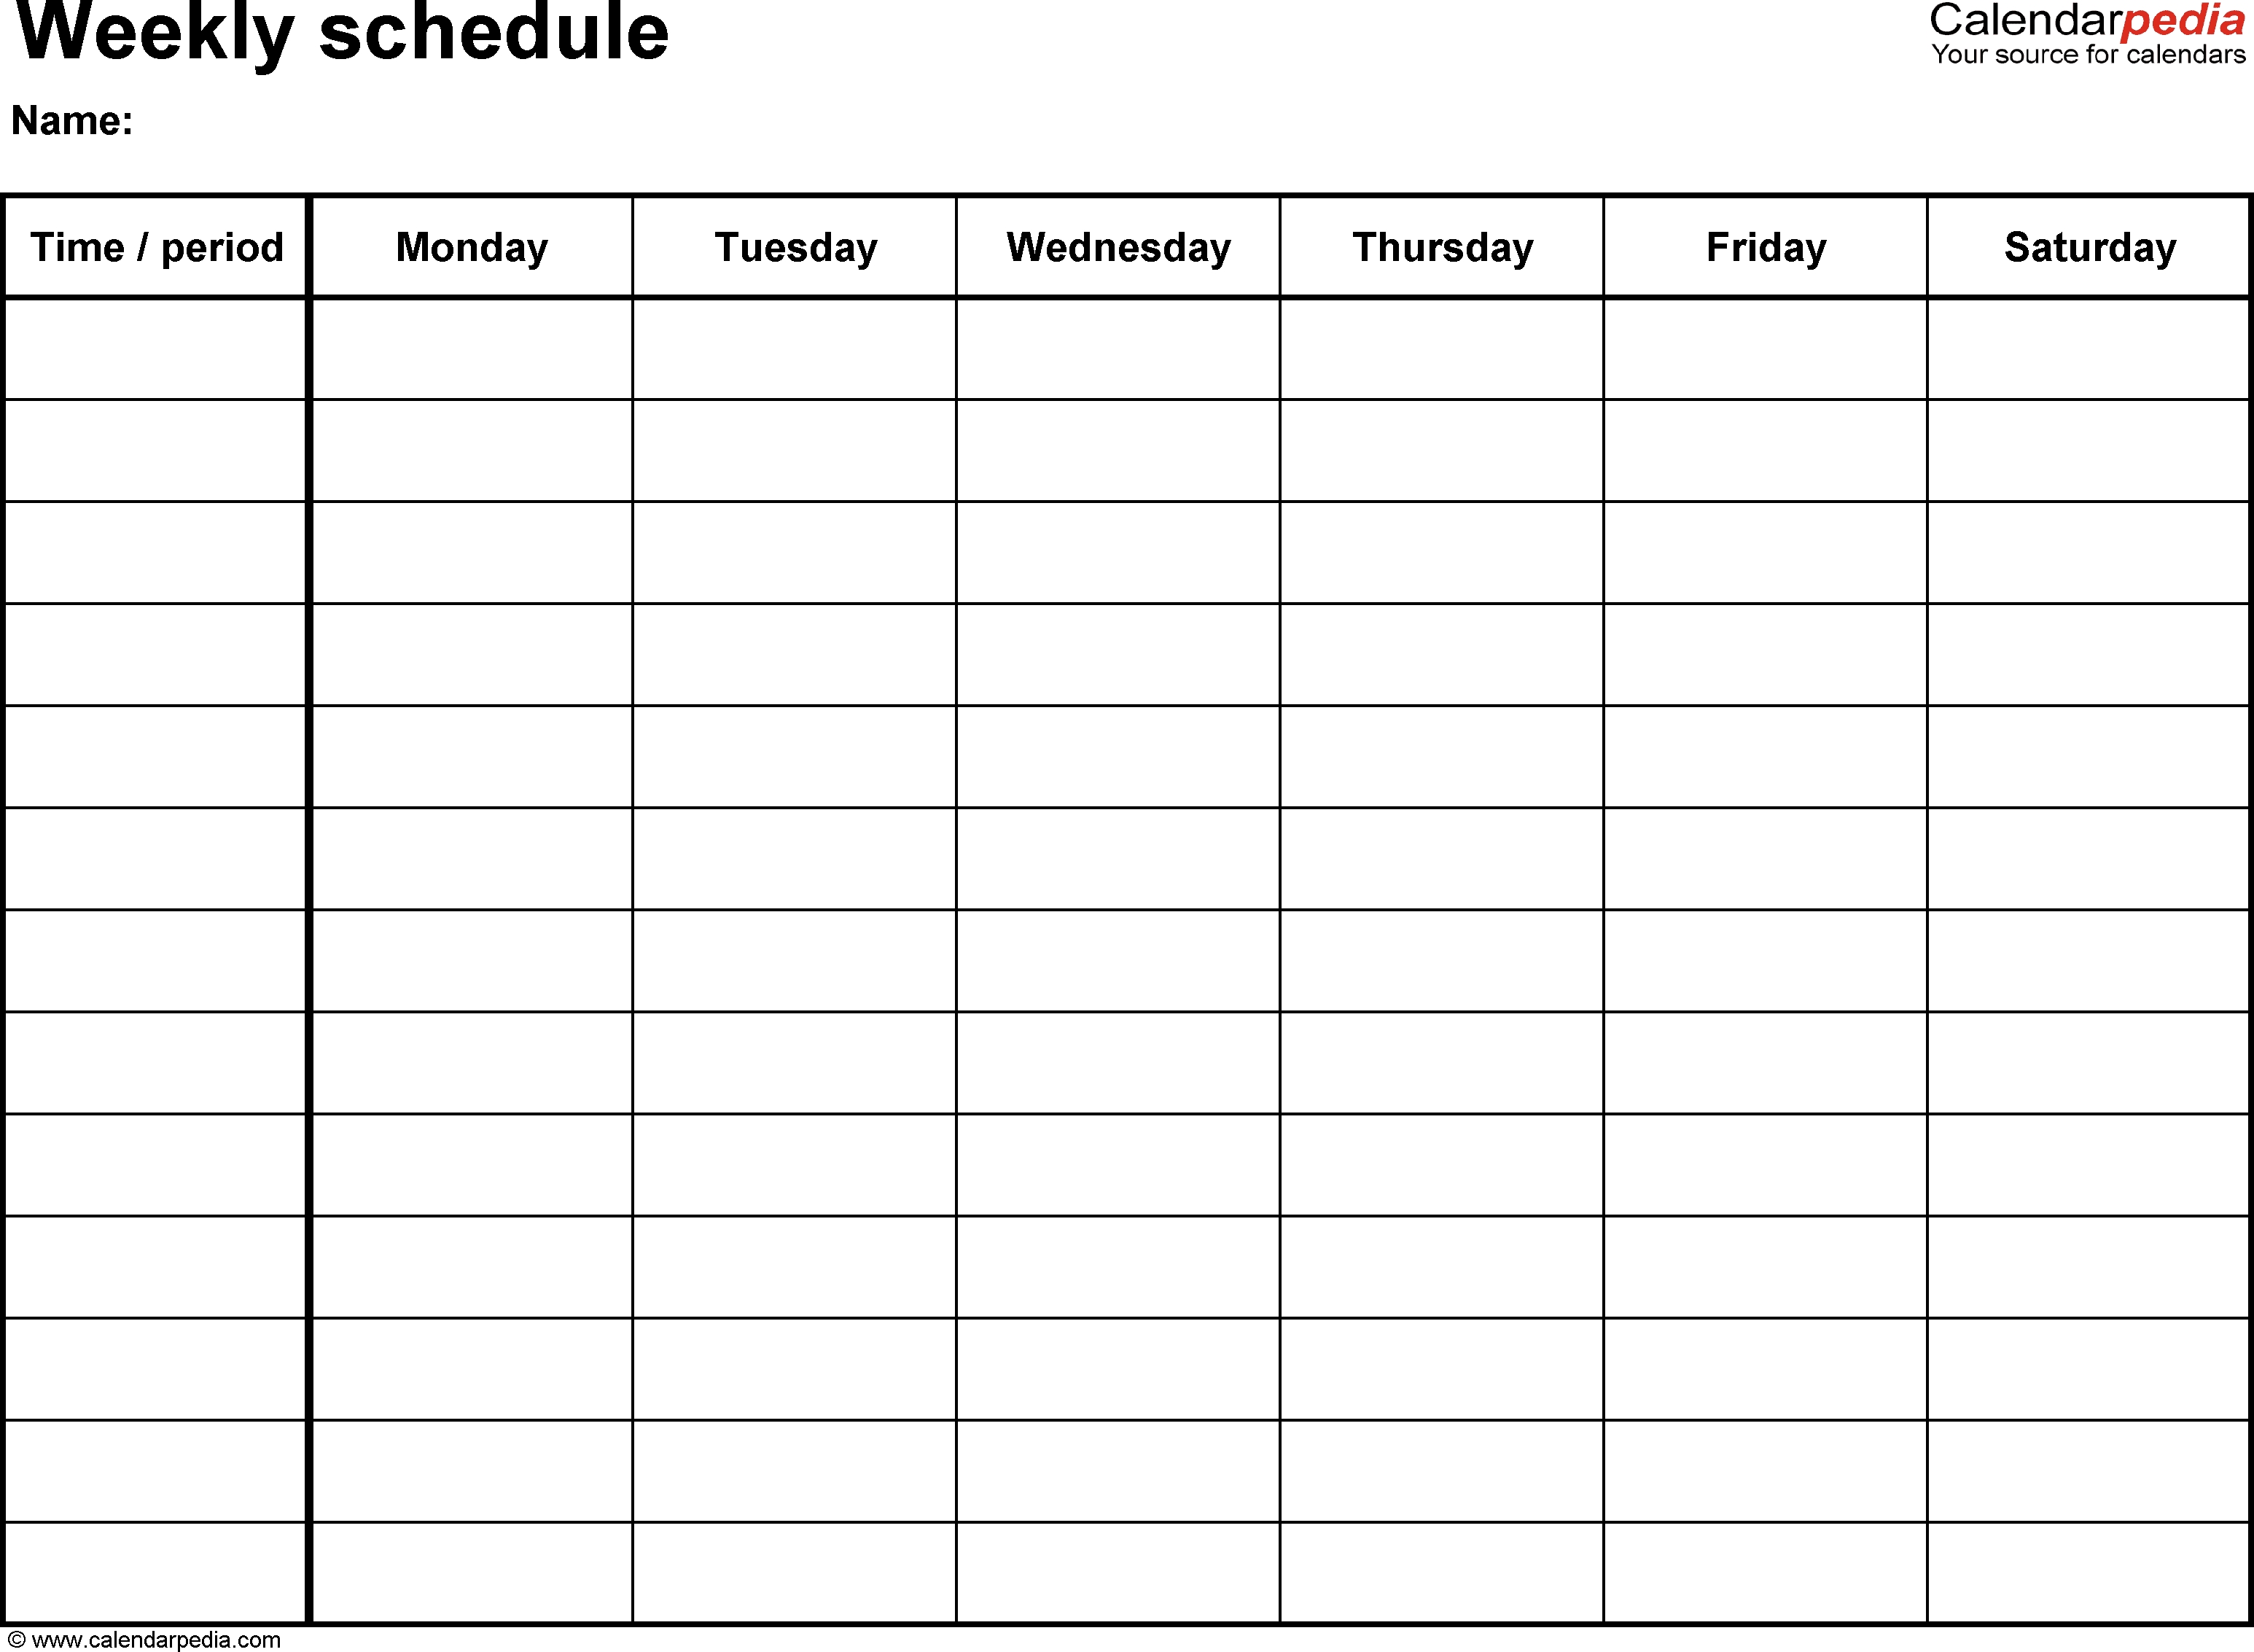 Free Weekly Schedule Templates For Word - 18 Templates with Friday Saturday Sunday Calendar Template